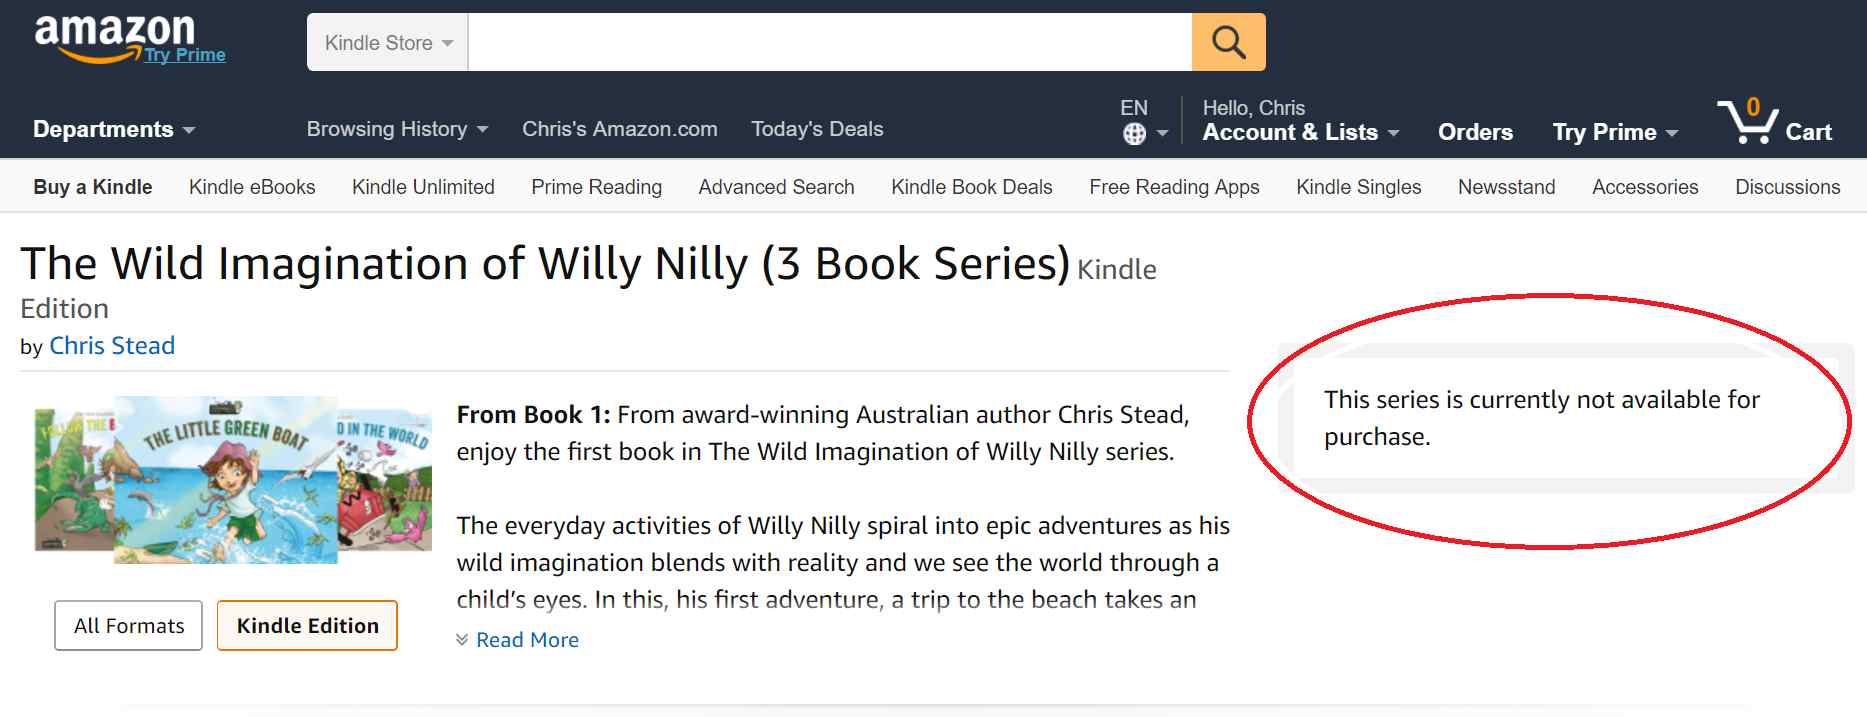 Amazon page showing series not available